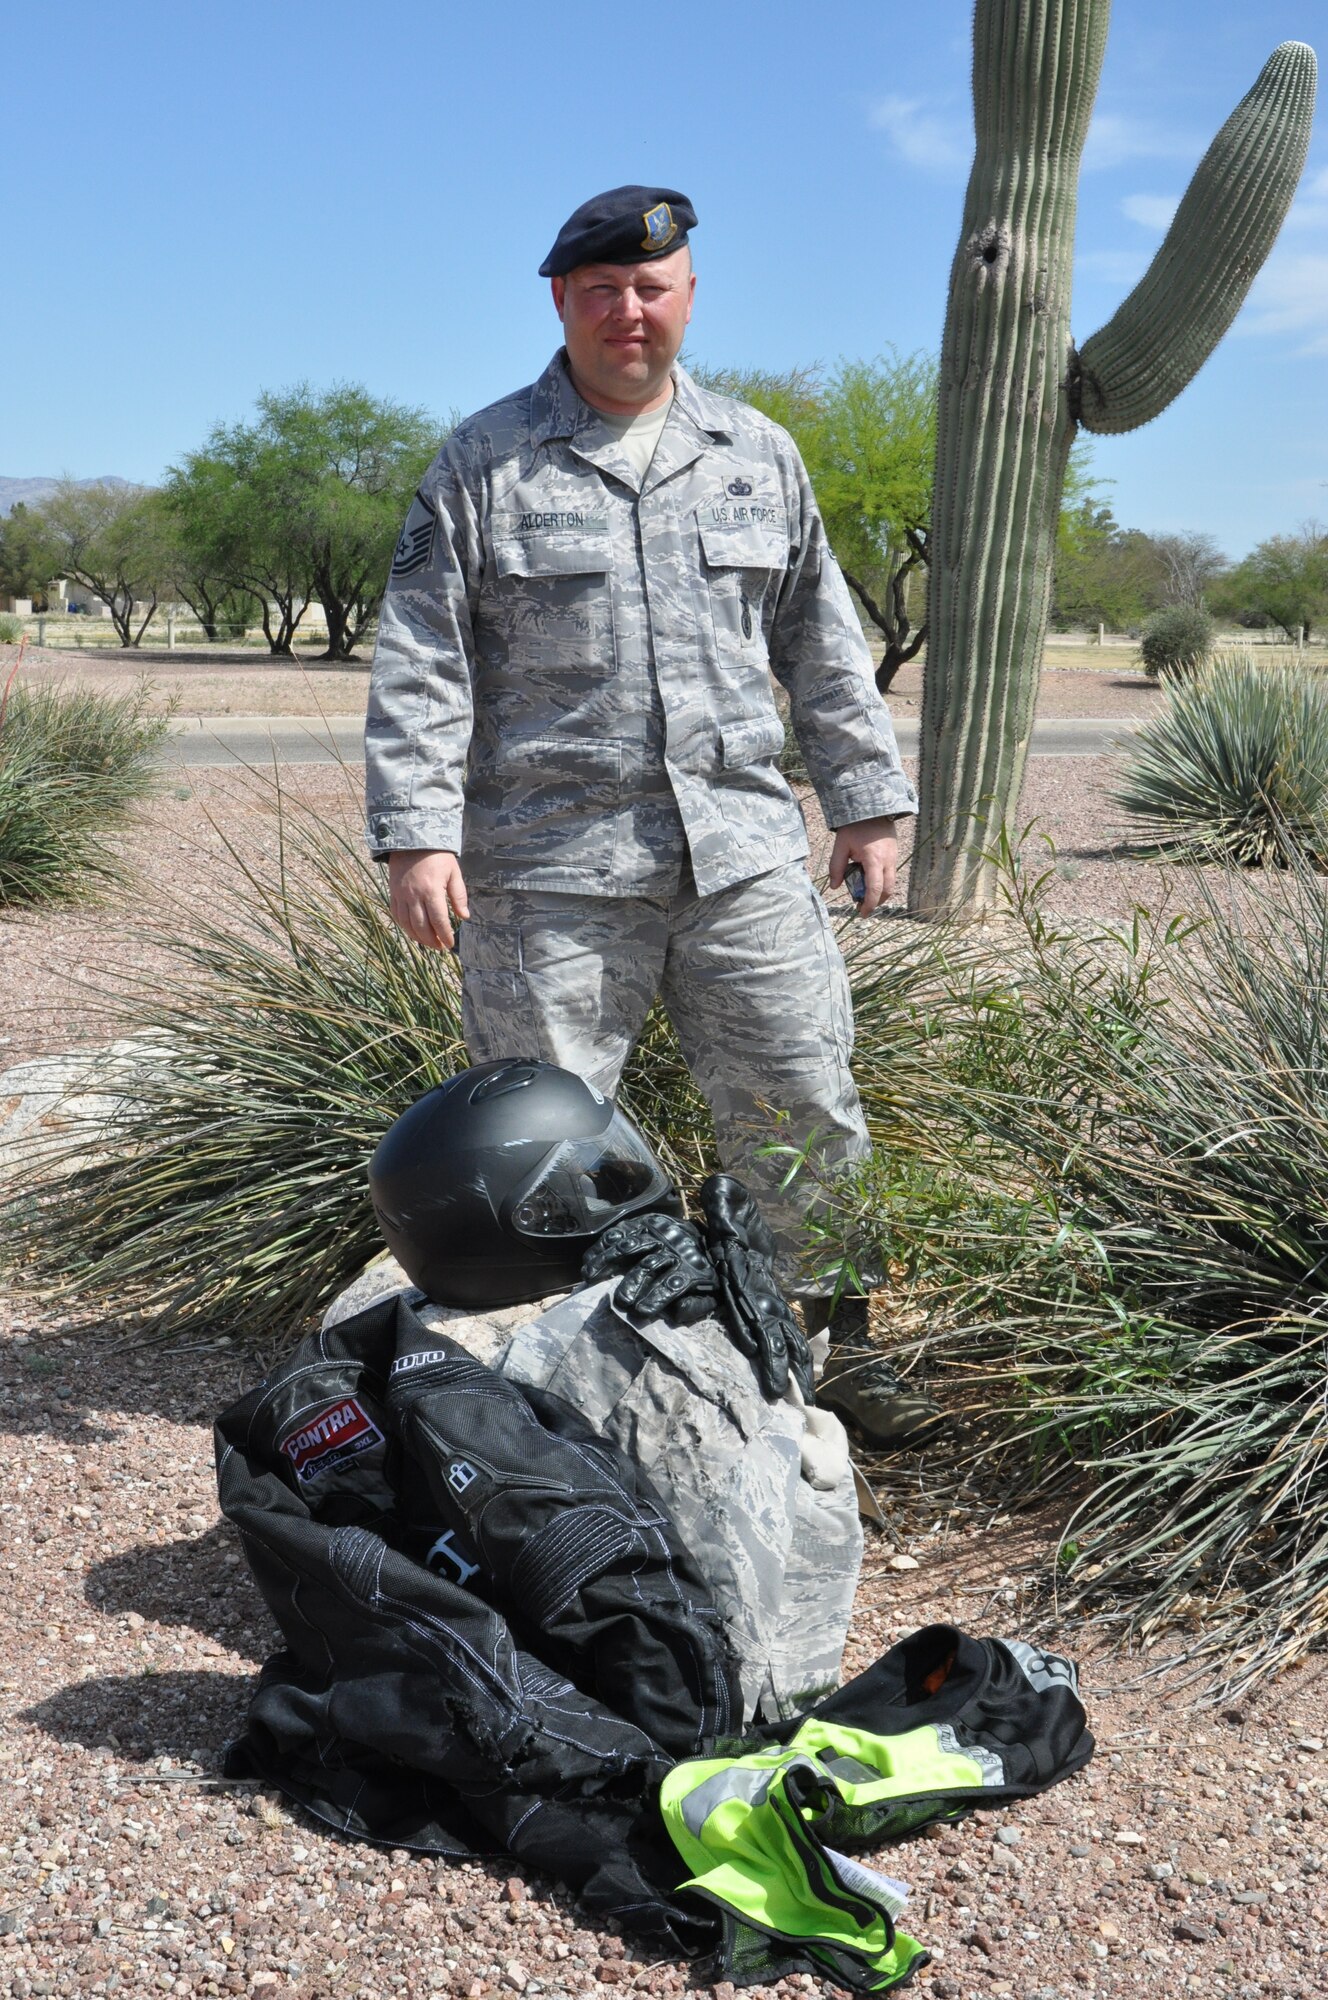 Master Sgt. David Alderton, 12th Air Force (Air Forces Southern) Force Protection, stands next to the motorcycle personal protective equipment that saved his life during a near fatal motorcycle accident on interstate 19 in Tucson, Ariz., March 27. (USAF photo by Master Sgt. Kelly Ogden/Released). 